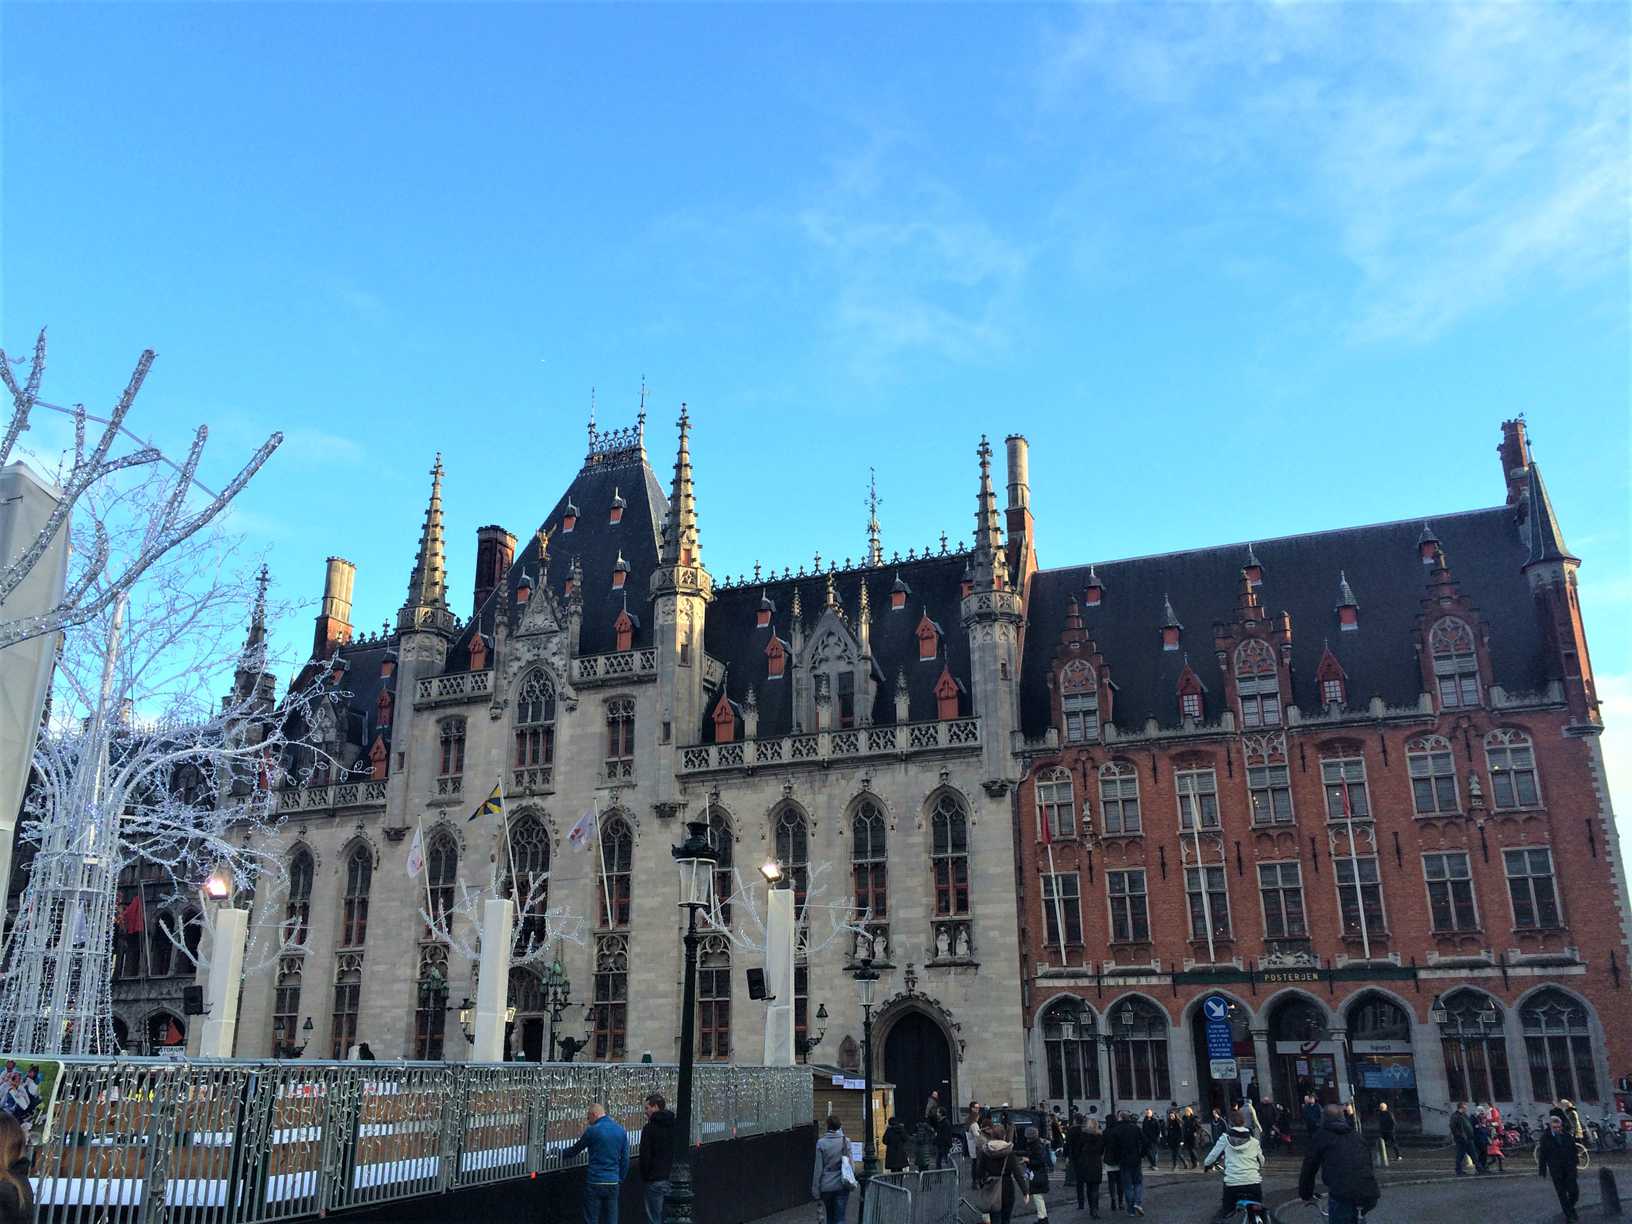 A picture of the Town Hall in Bruges, Belgium with an ice rink, Christmas decorations, and people in the forefront.